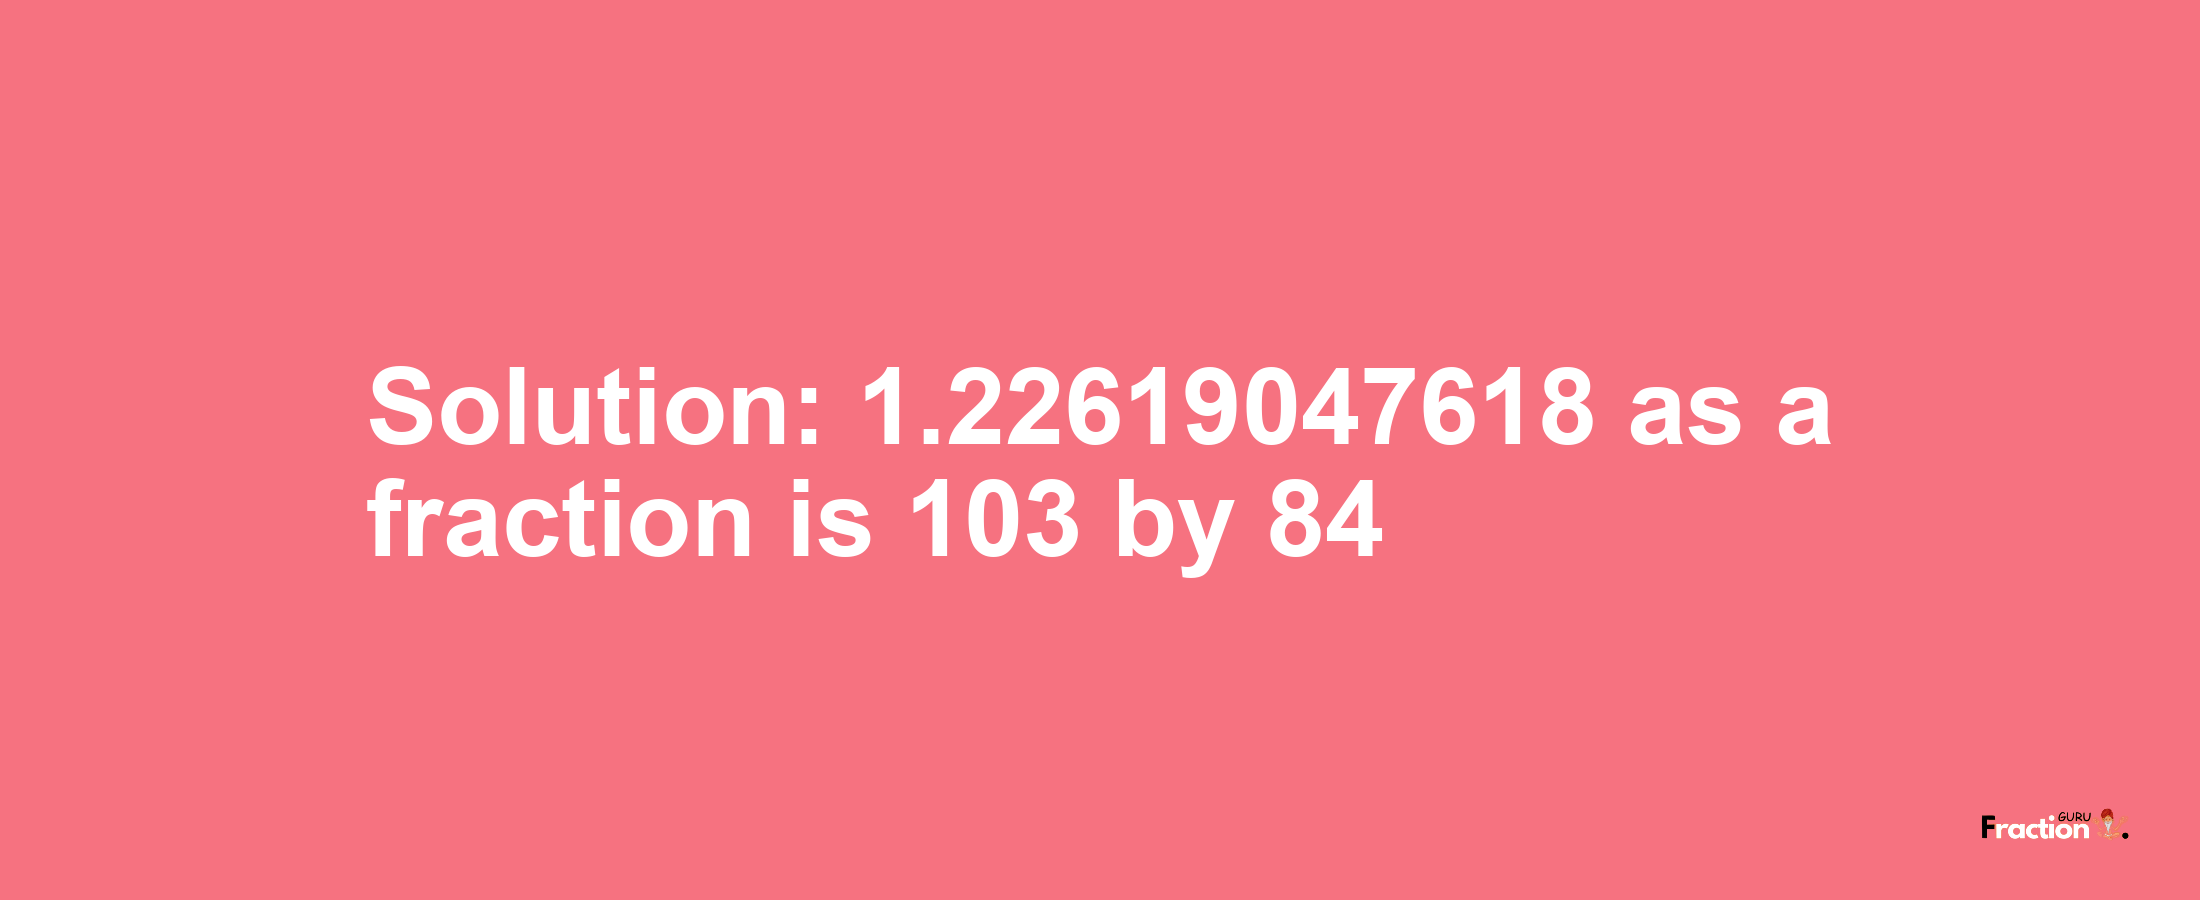 Solution:1.22619047618 as a fraction is 103/84